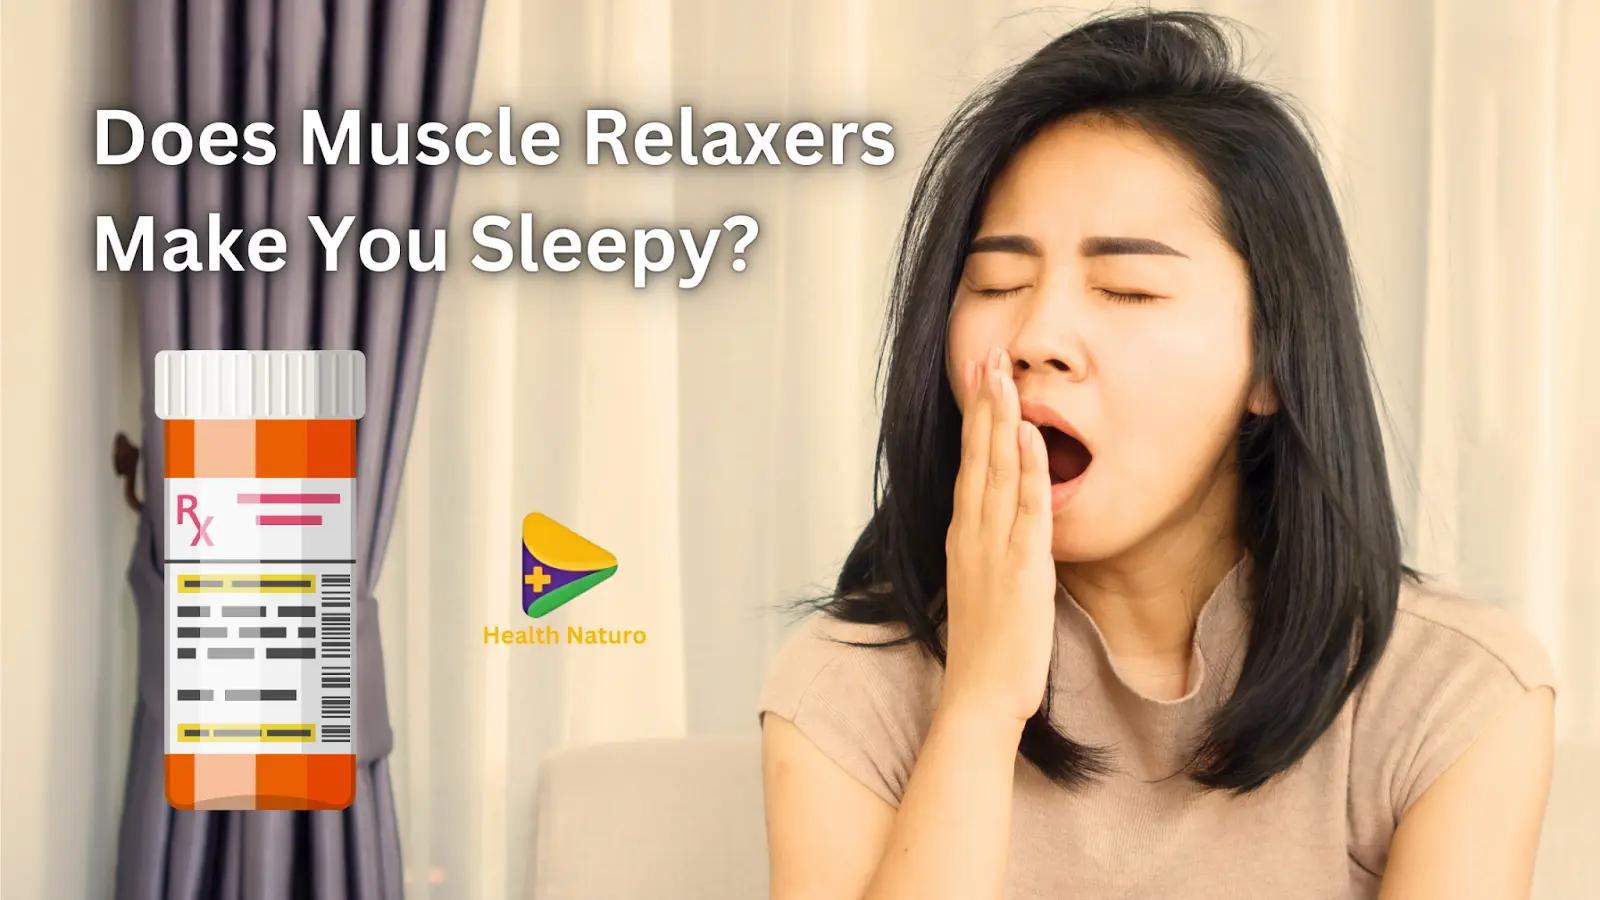 Does Muscle Relaxers Make You Sleepy?